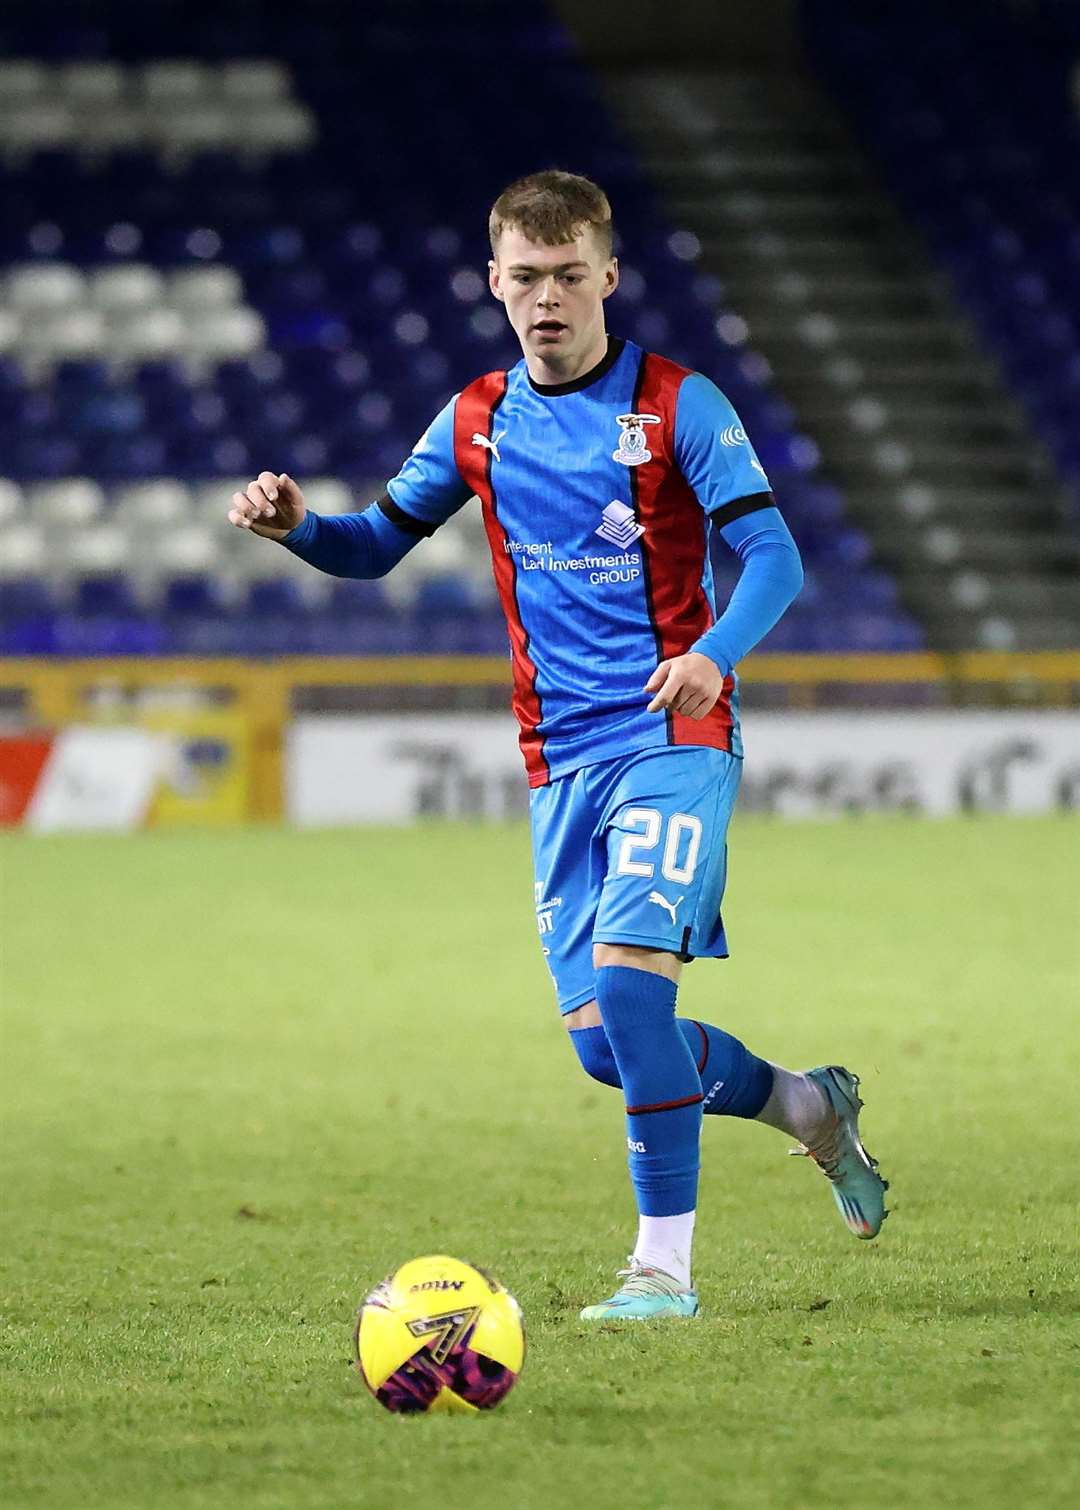 Picture - Ken Macpherson. Inverness CT(6) v Cove Rangers(1). 02/01/23. ICT’s new loan signing Jay Henderson made his debut.